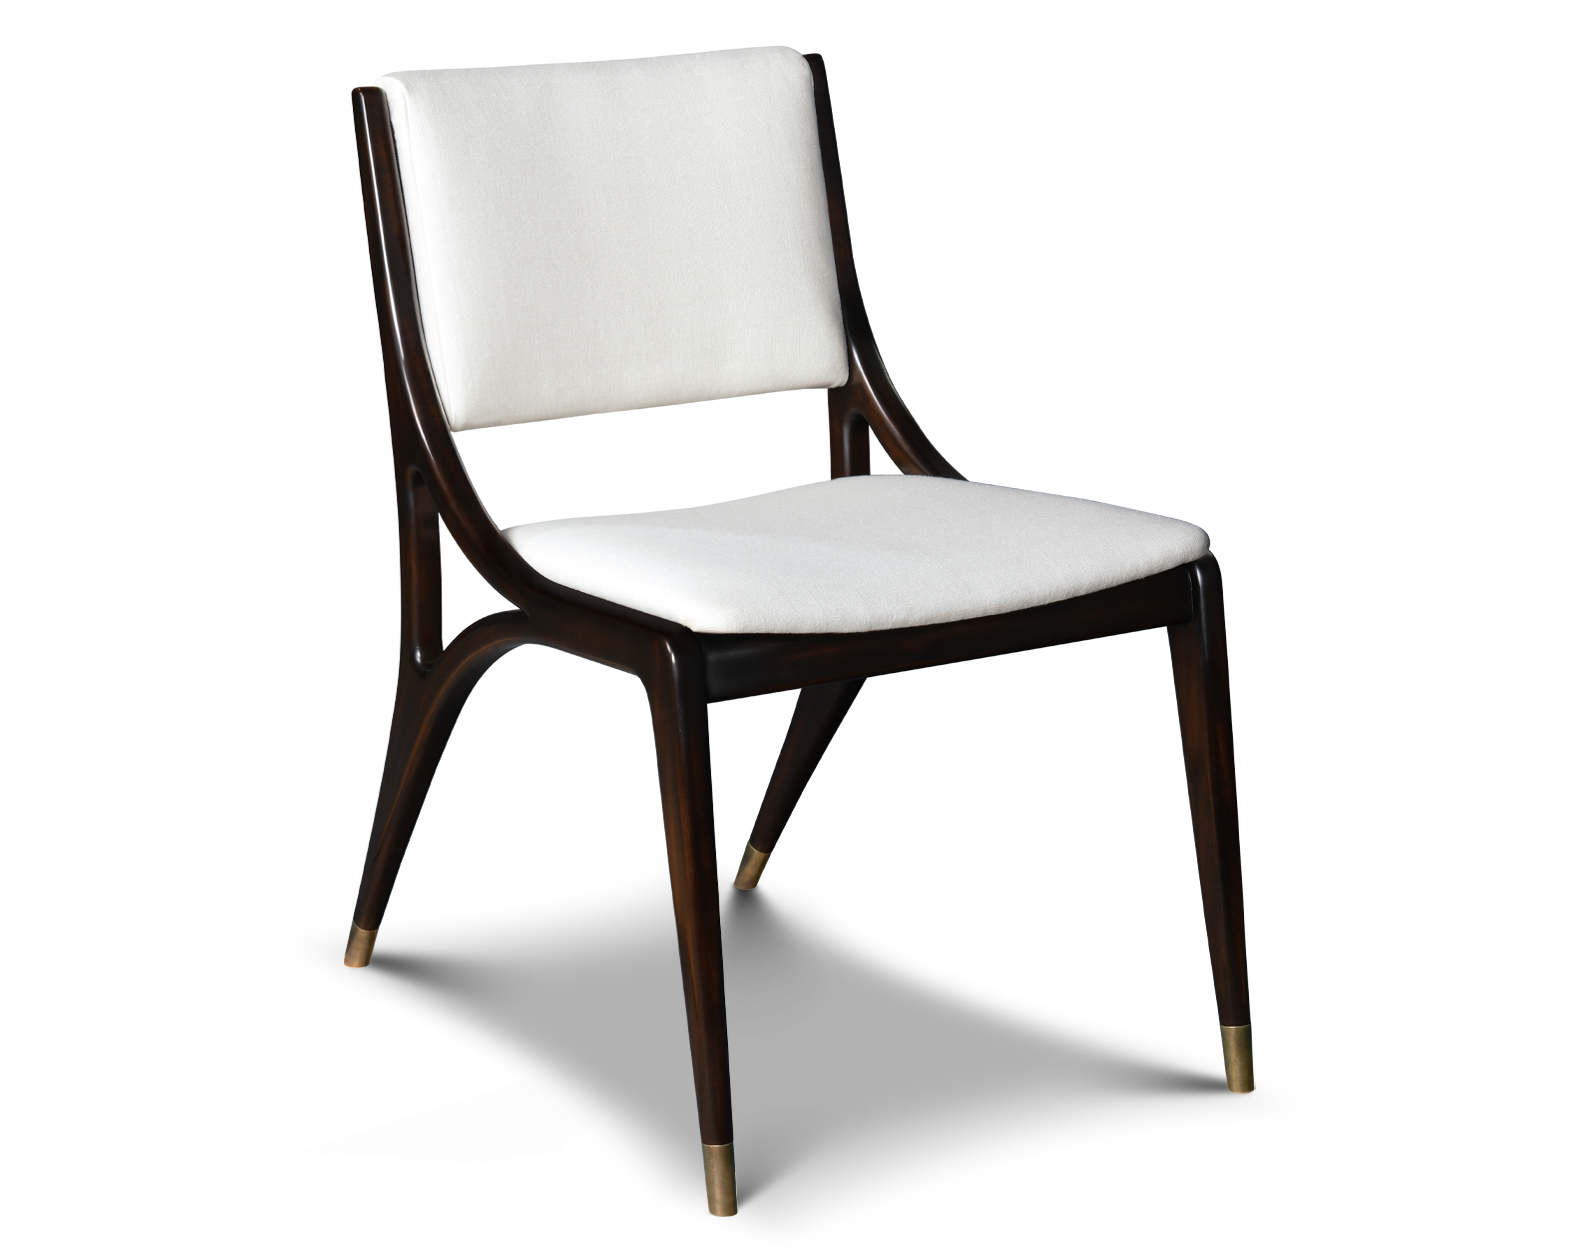 BAVENT SIDE CHAIR